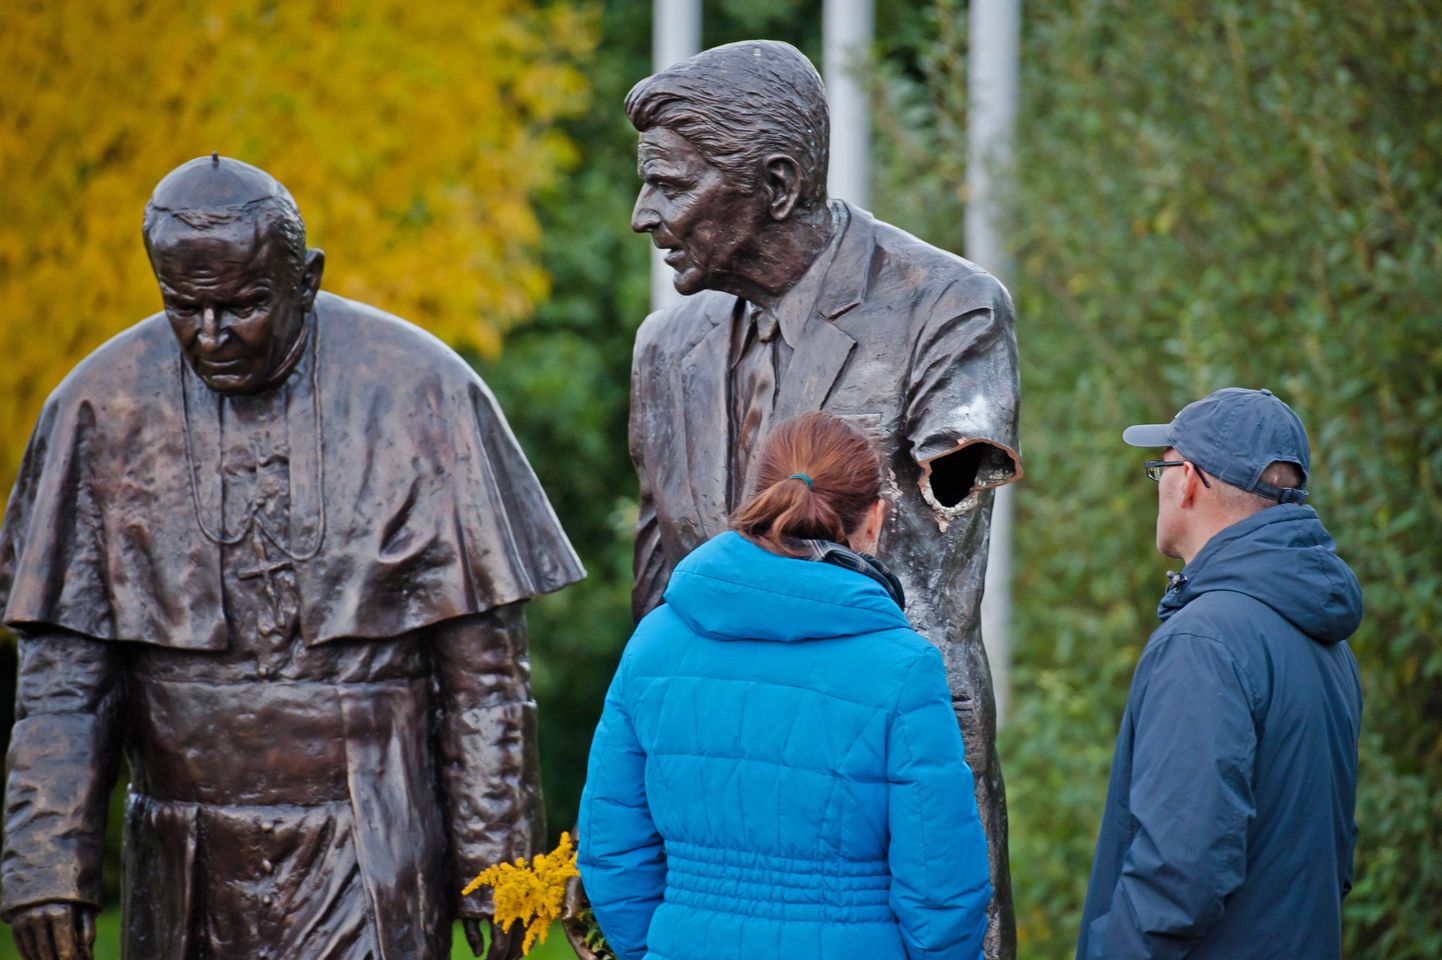 USA ekspresidenti Ronald Reagani ja paavst Johannes Paulus II kujutav skulptuur Gdanskis. 

e seen looking at a former president Ronald Reagan statue with a severed arm in a park in Gdansk, Poland. The bronze statue is a larger than life rendering of Reagan and the Polish born Pope John Paul II, inspired by an AP photograph taken by Scott Stewart during John Paul's visit to the US in 1987 and honor's Reagan's support for Poland's struggle to end communism. The police are searching for the vandal who cut the arm off. (AP Photo/Mateusz Ochocki) / TT / kod 436